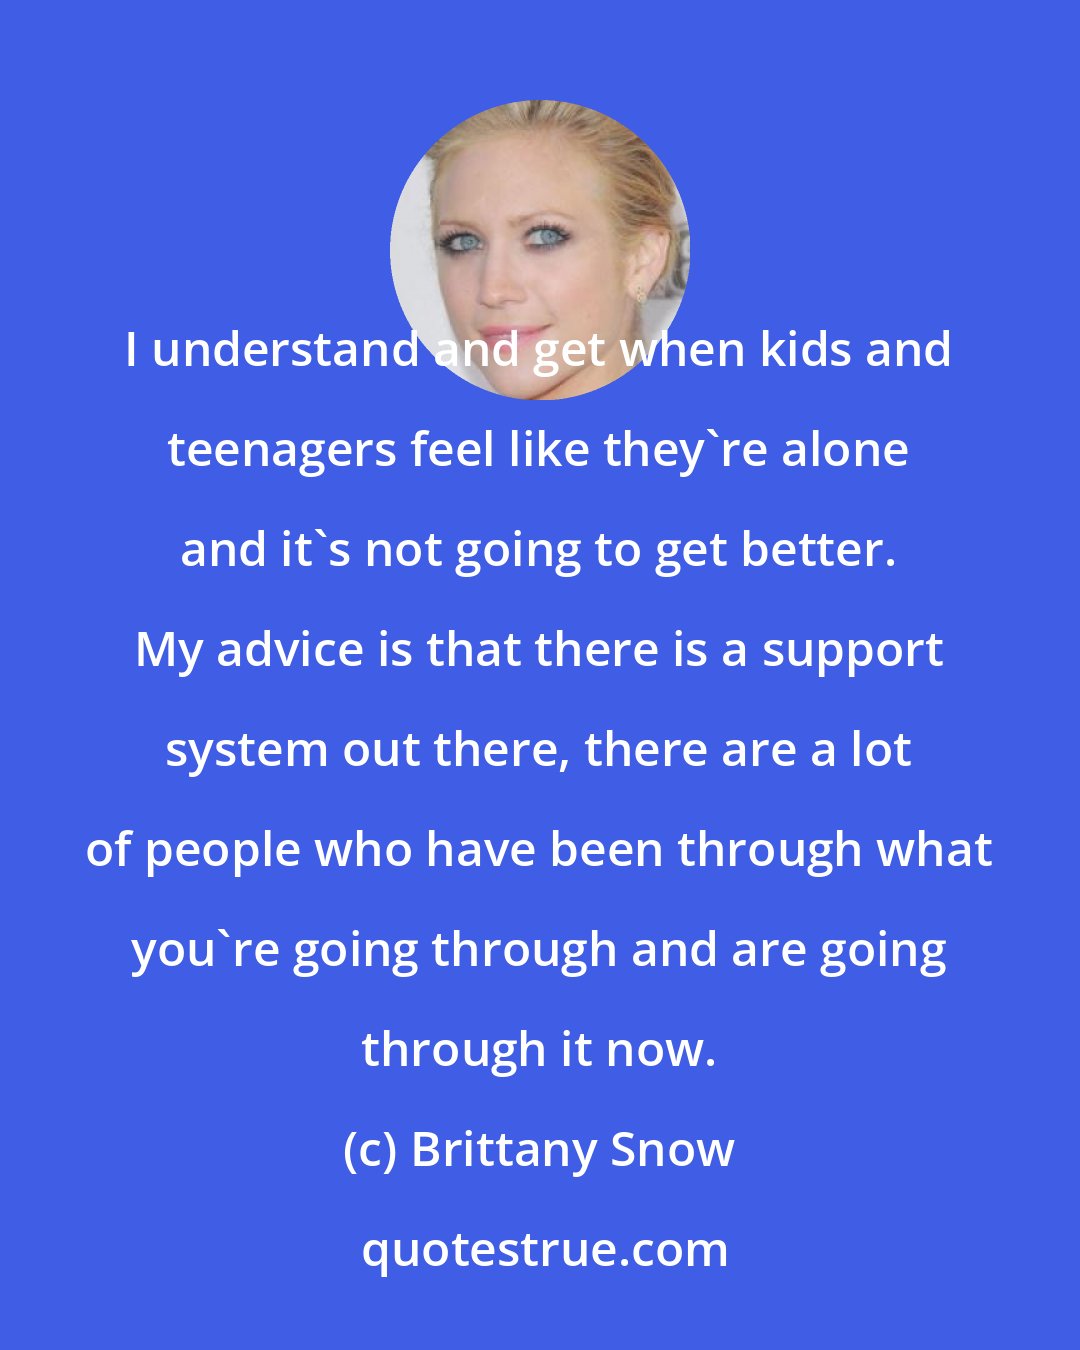 Brittany Snow: I understand and get when kids and teenagers feel like they're alone and it's not going to get better. My advice is that there is a support system out there, there are a lot of people who have been through what you're going through and are going through it now.